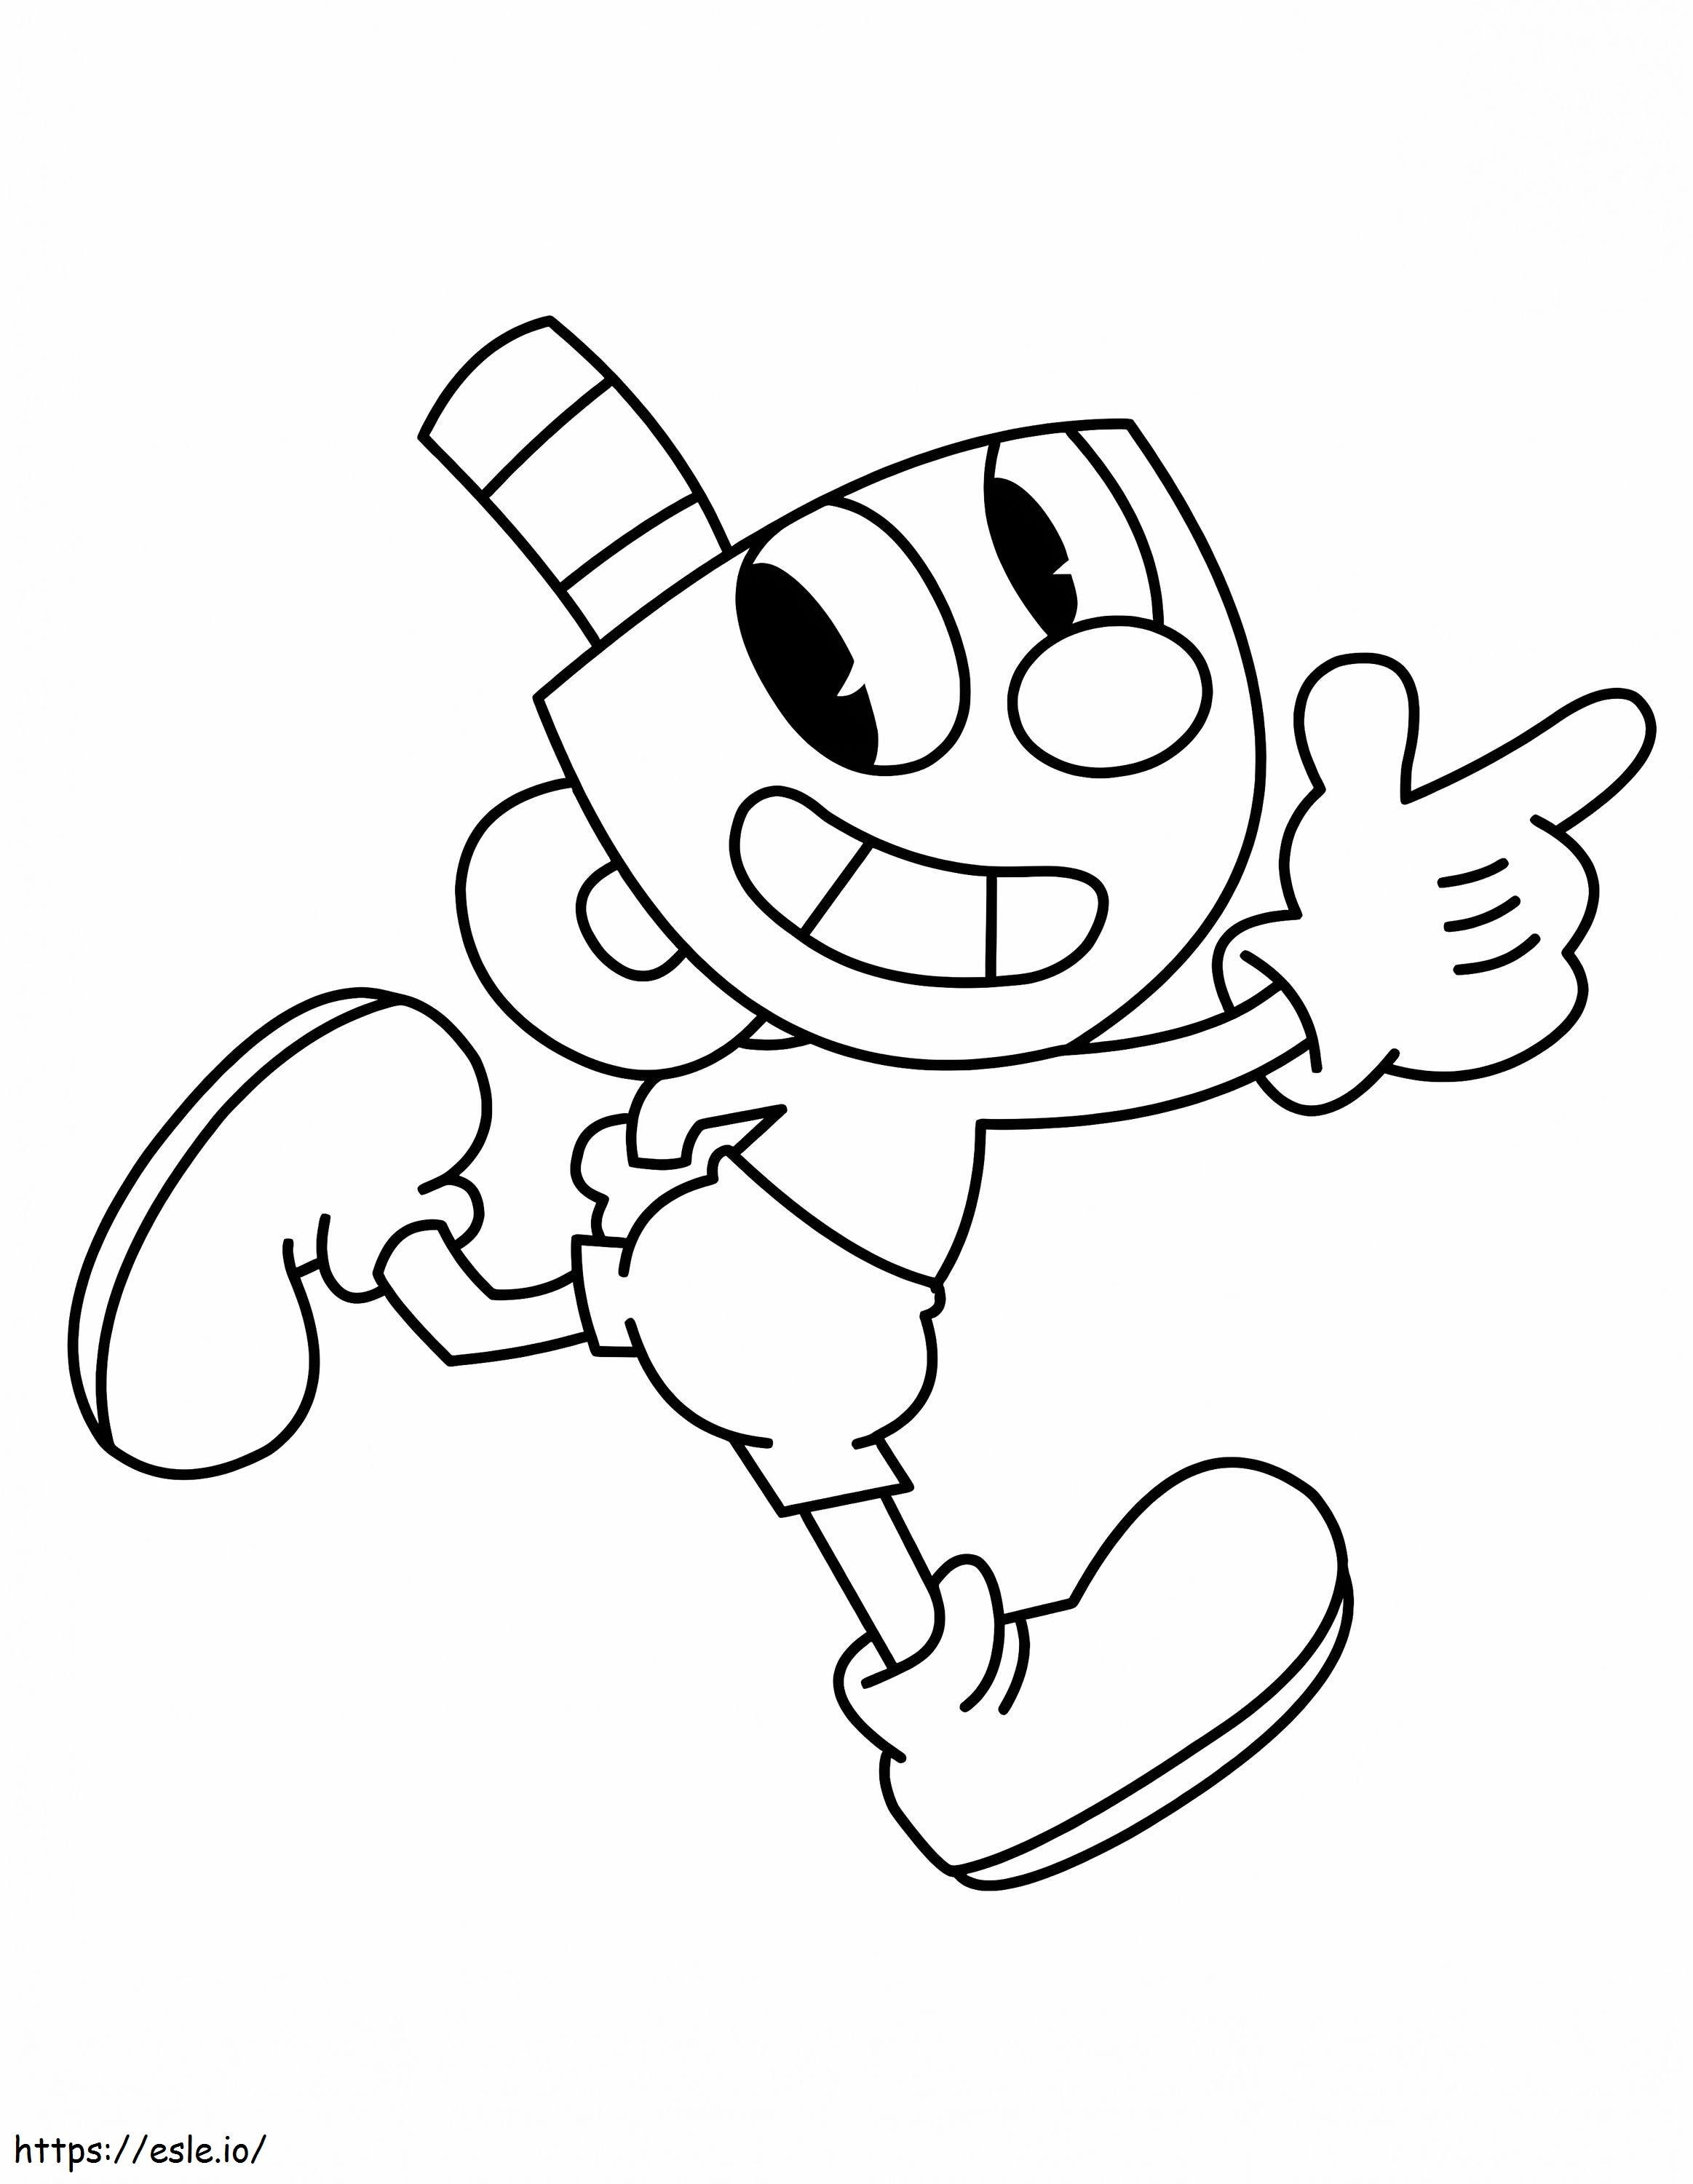 Funny Cuphead coloring page